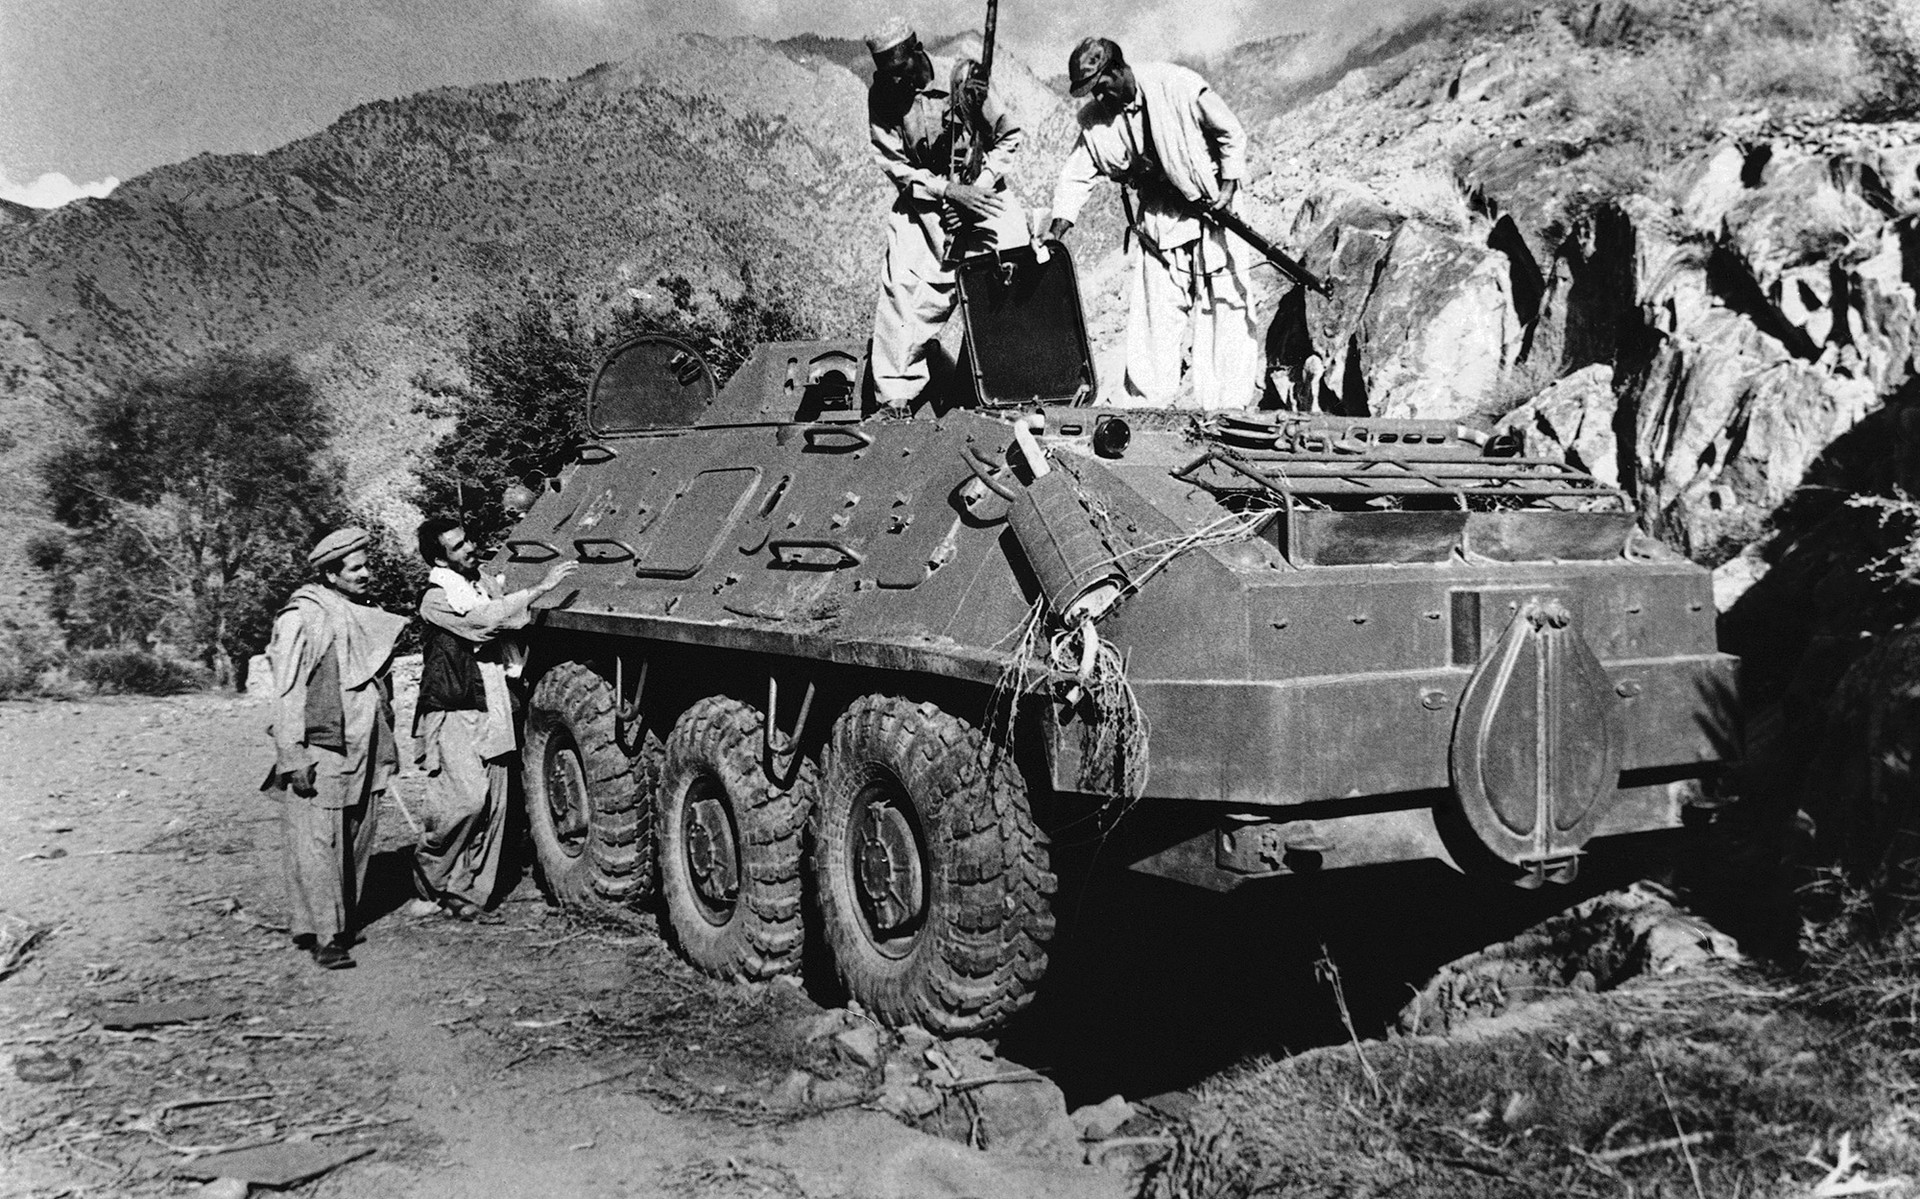 Mujahideen fighters inspect a Soviet tank captured in fighting with the Kabul government forces on September near Asmar, Afghanistan on Thursday, Dec. 27, 1979